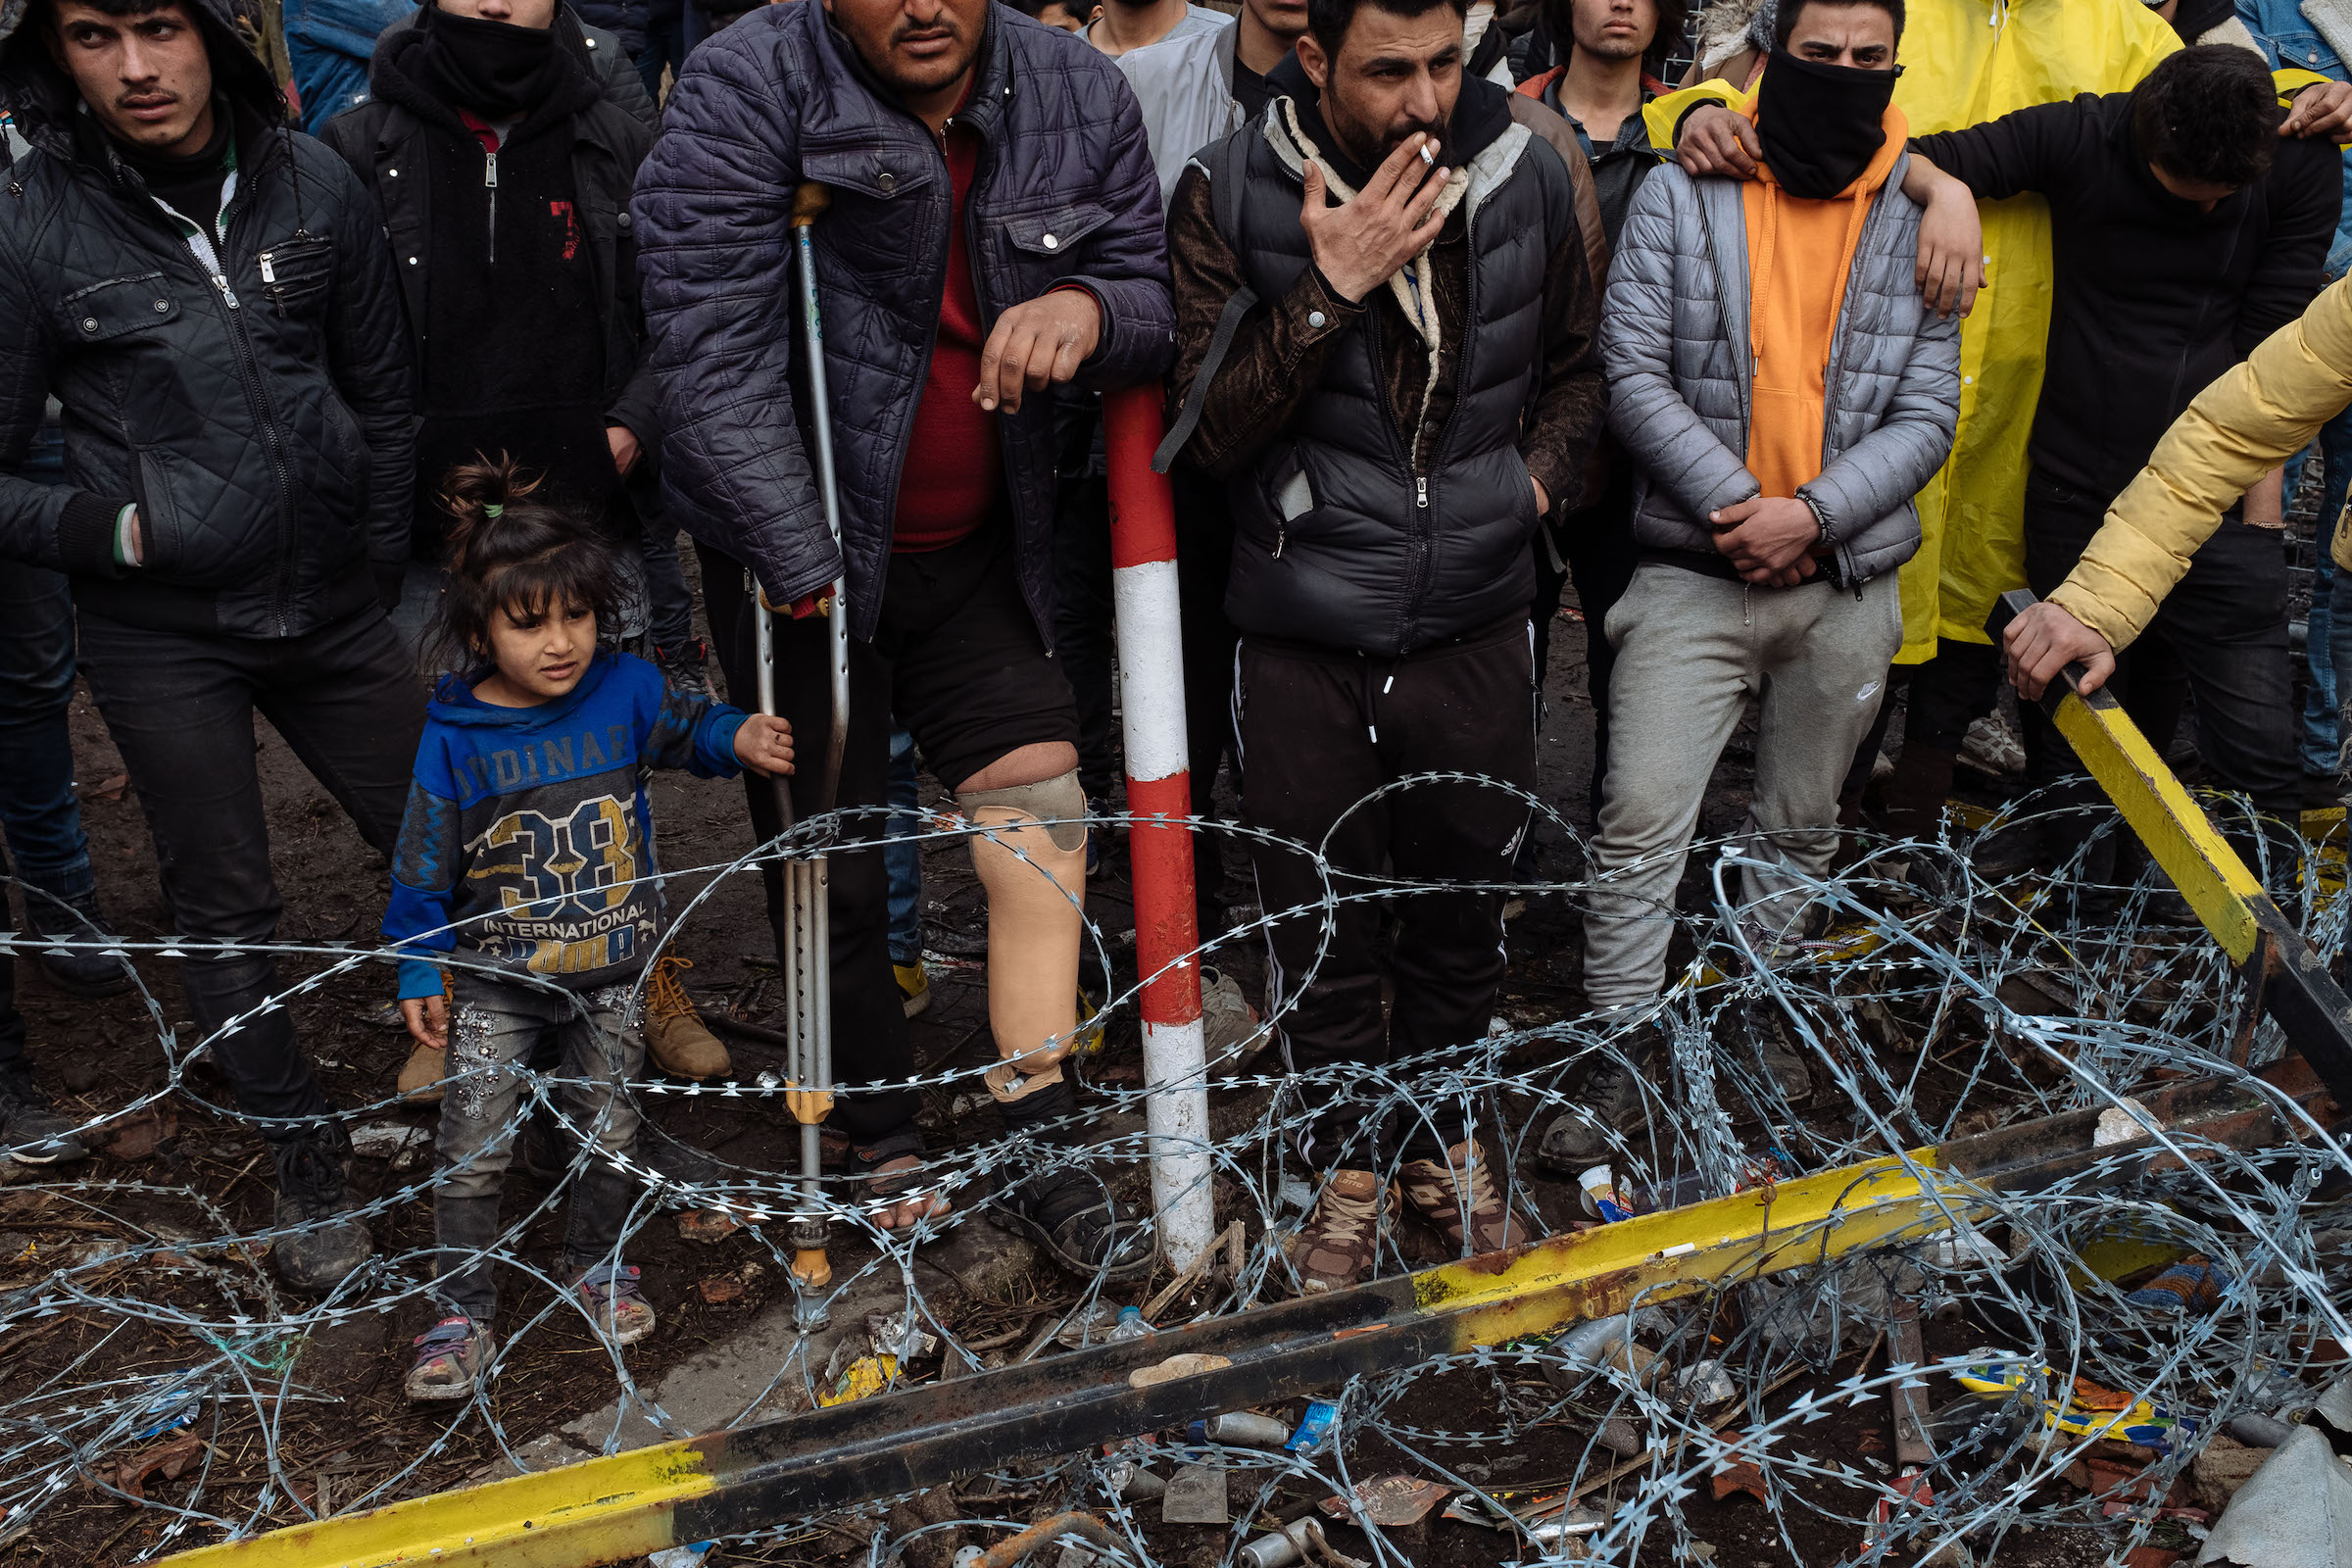 Men and a child wait in front of a border gate in Edirne, hoping to cross from Turkey into Greece.